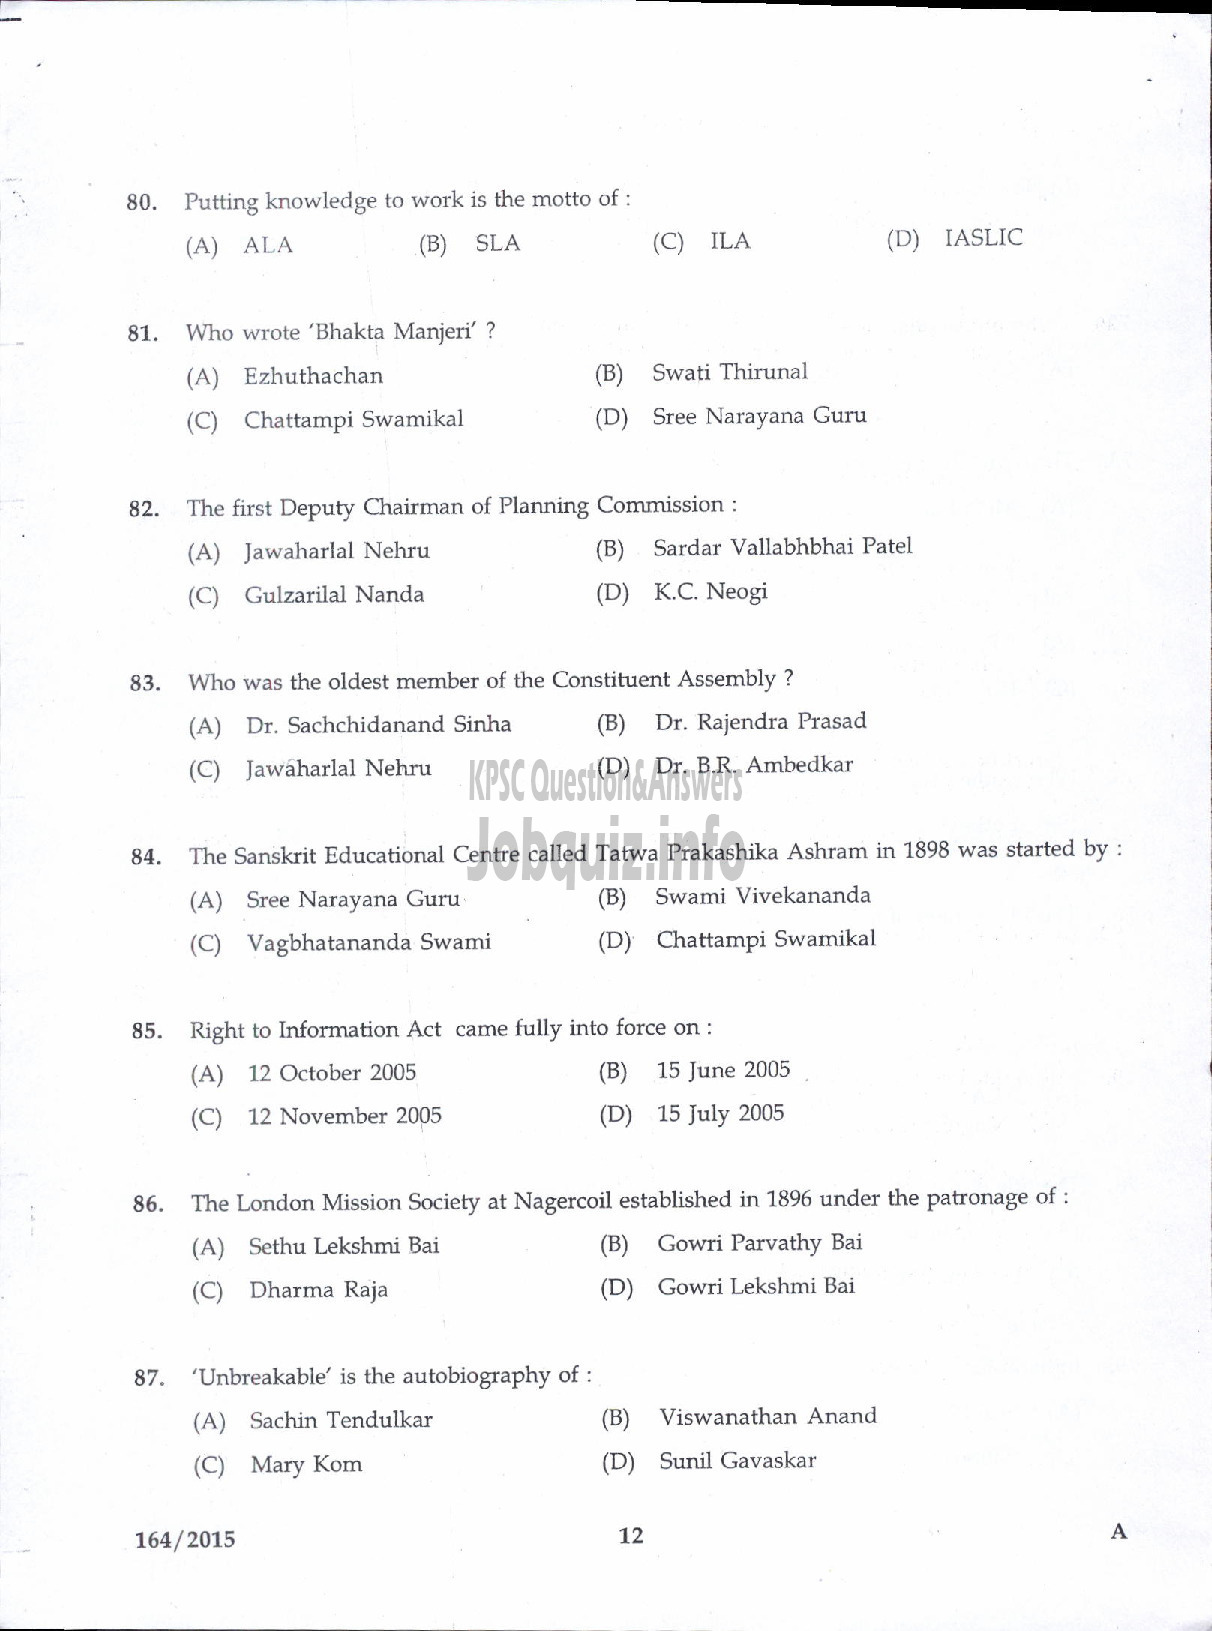 Kerala PSC Question Paper - LIBRARIAN GR III STATE CENTRAL LIBRARY-10